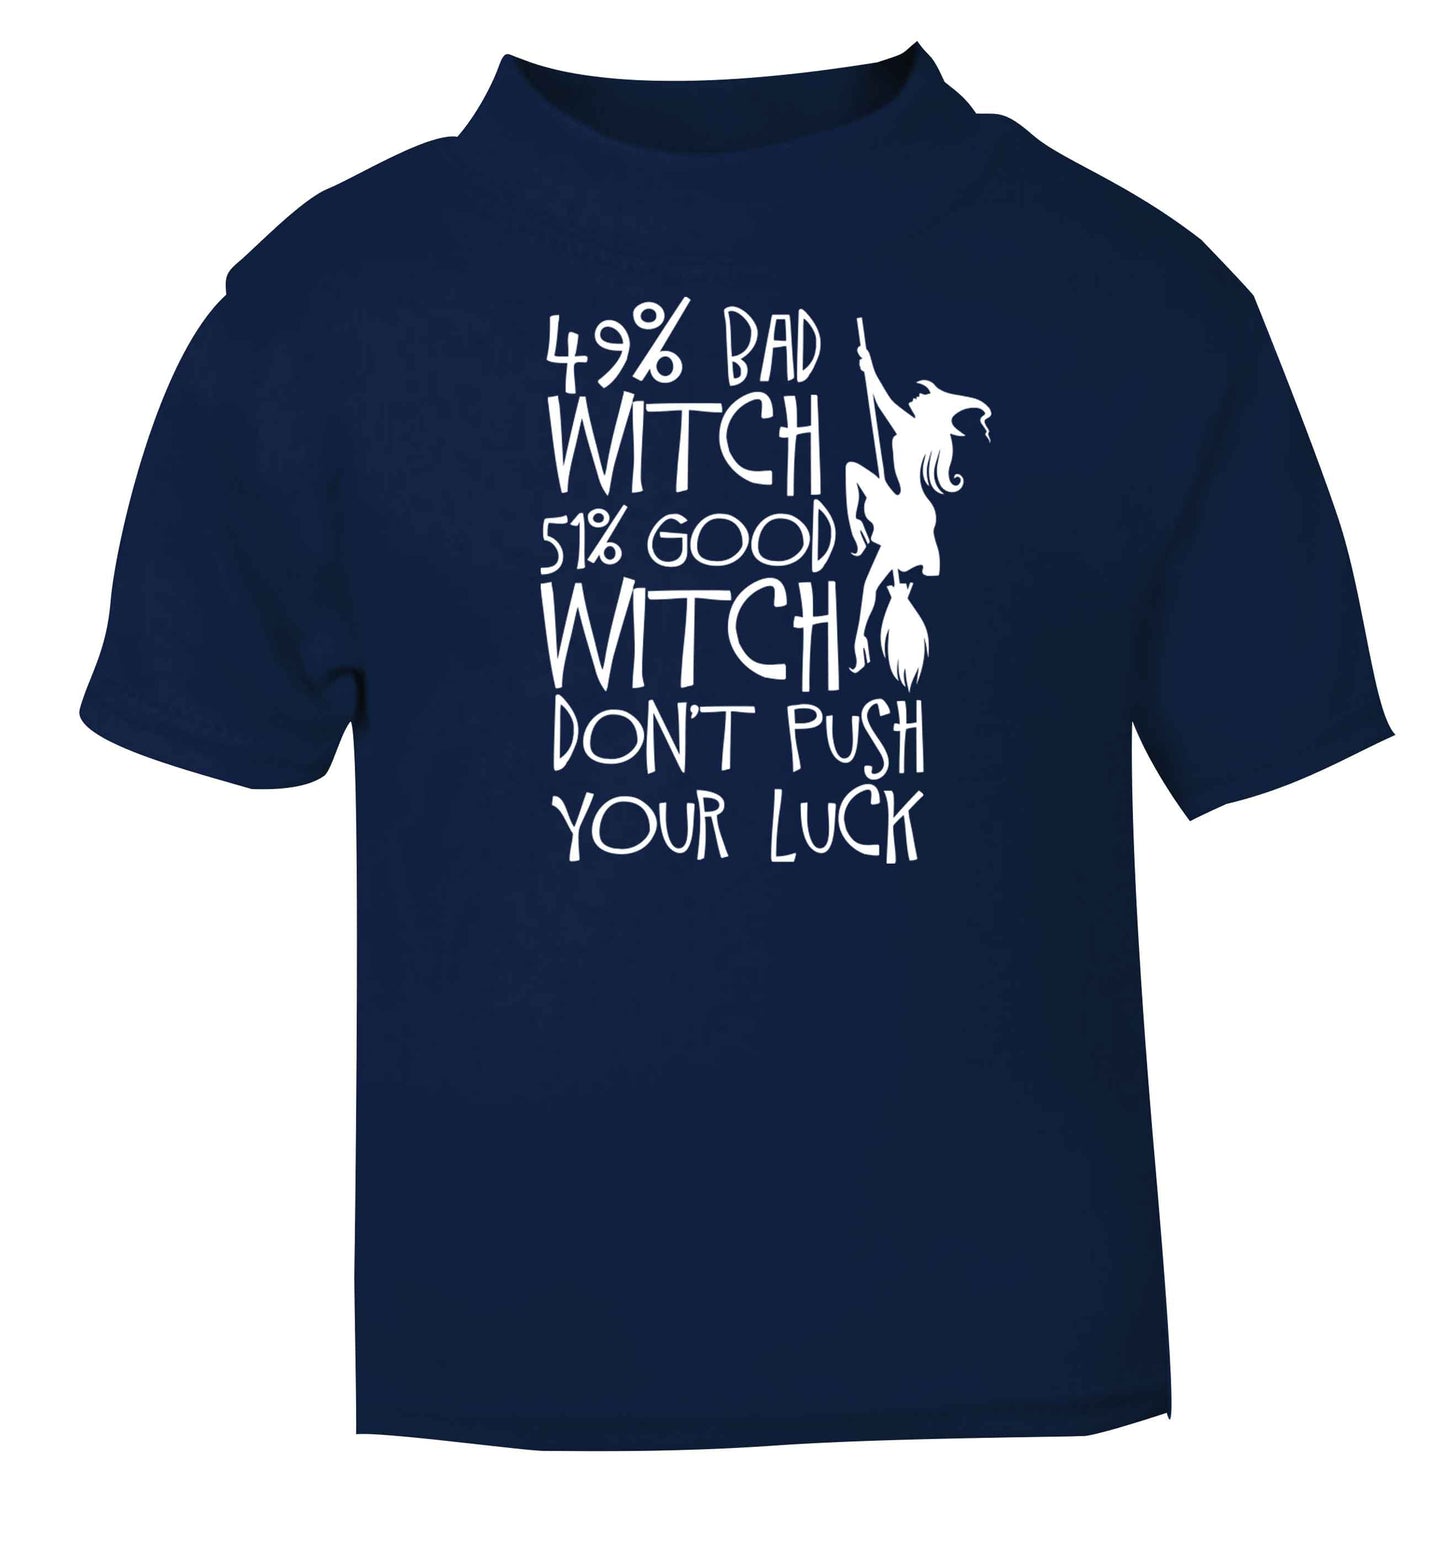 49% bad witch 51% good witch don't push your luck navy baby toddler Tshirt 2 Years